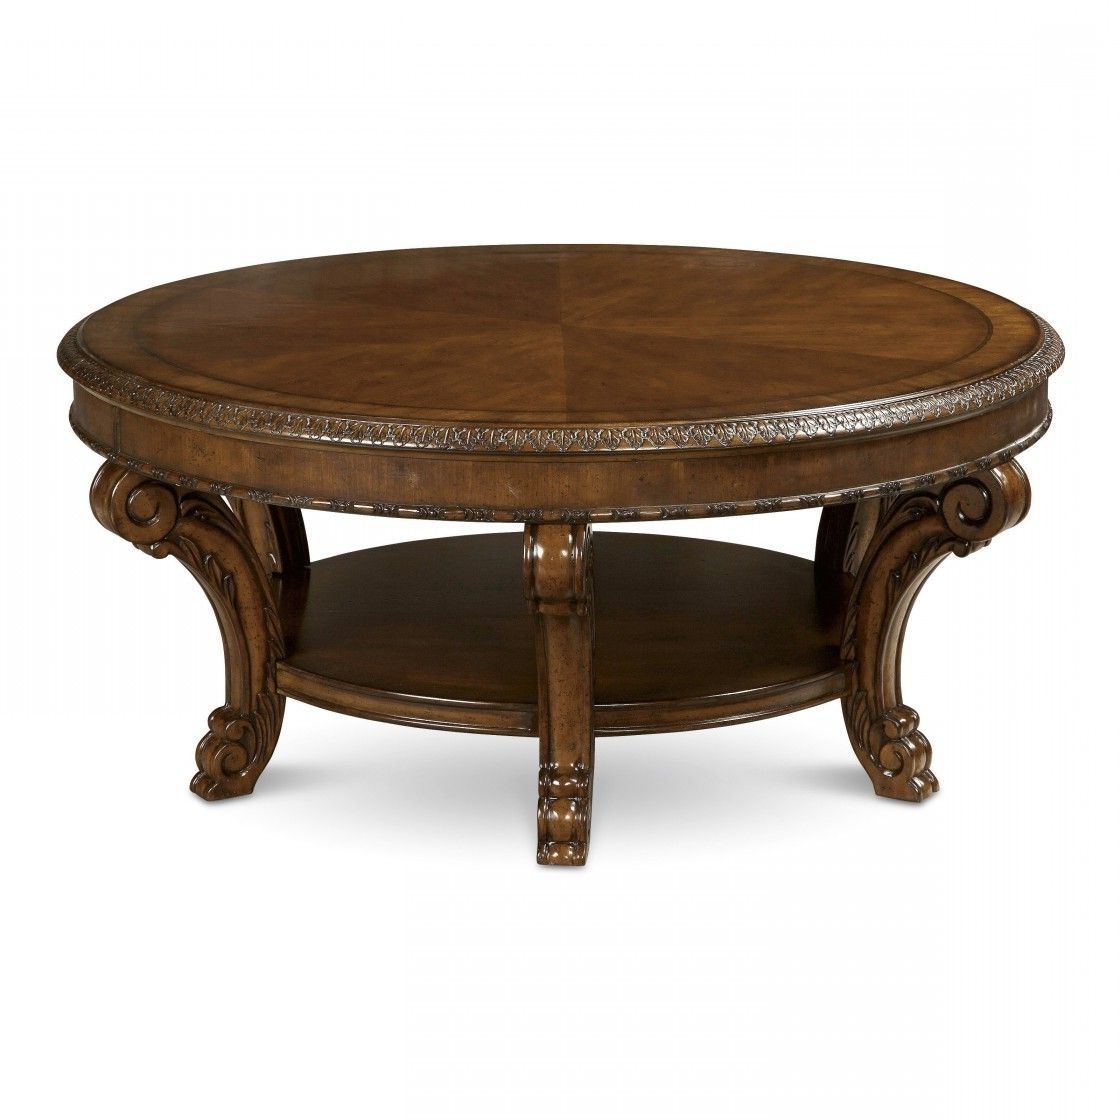 Popular Round Carved Wood Coffee Tables Inside Amazing Luxury High Gloss Finished Brown Wooden Furniture Hand (Gallery 12 of 20)